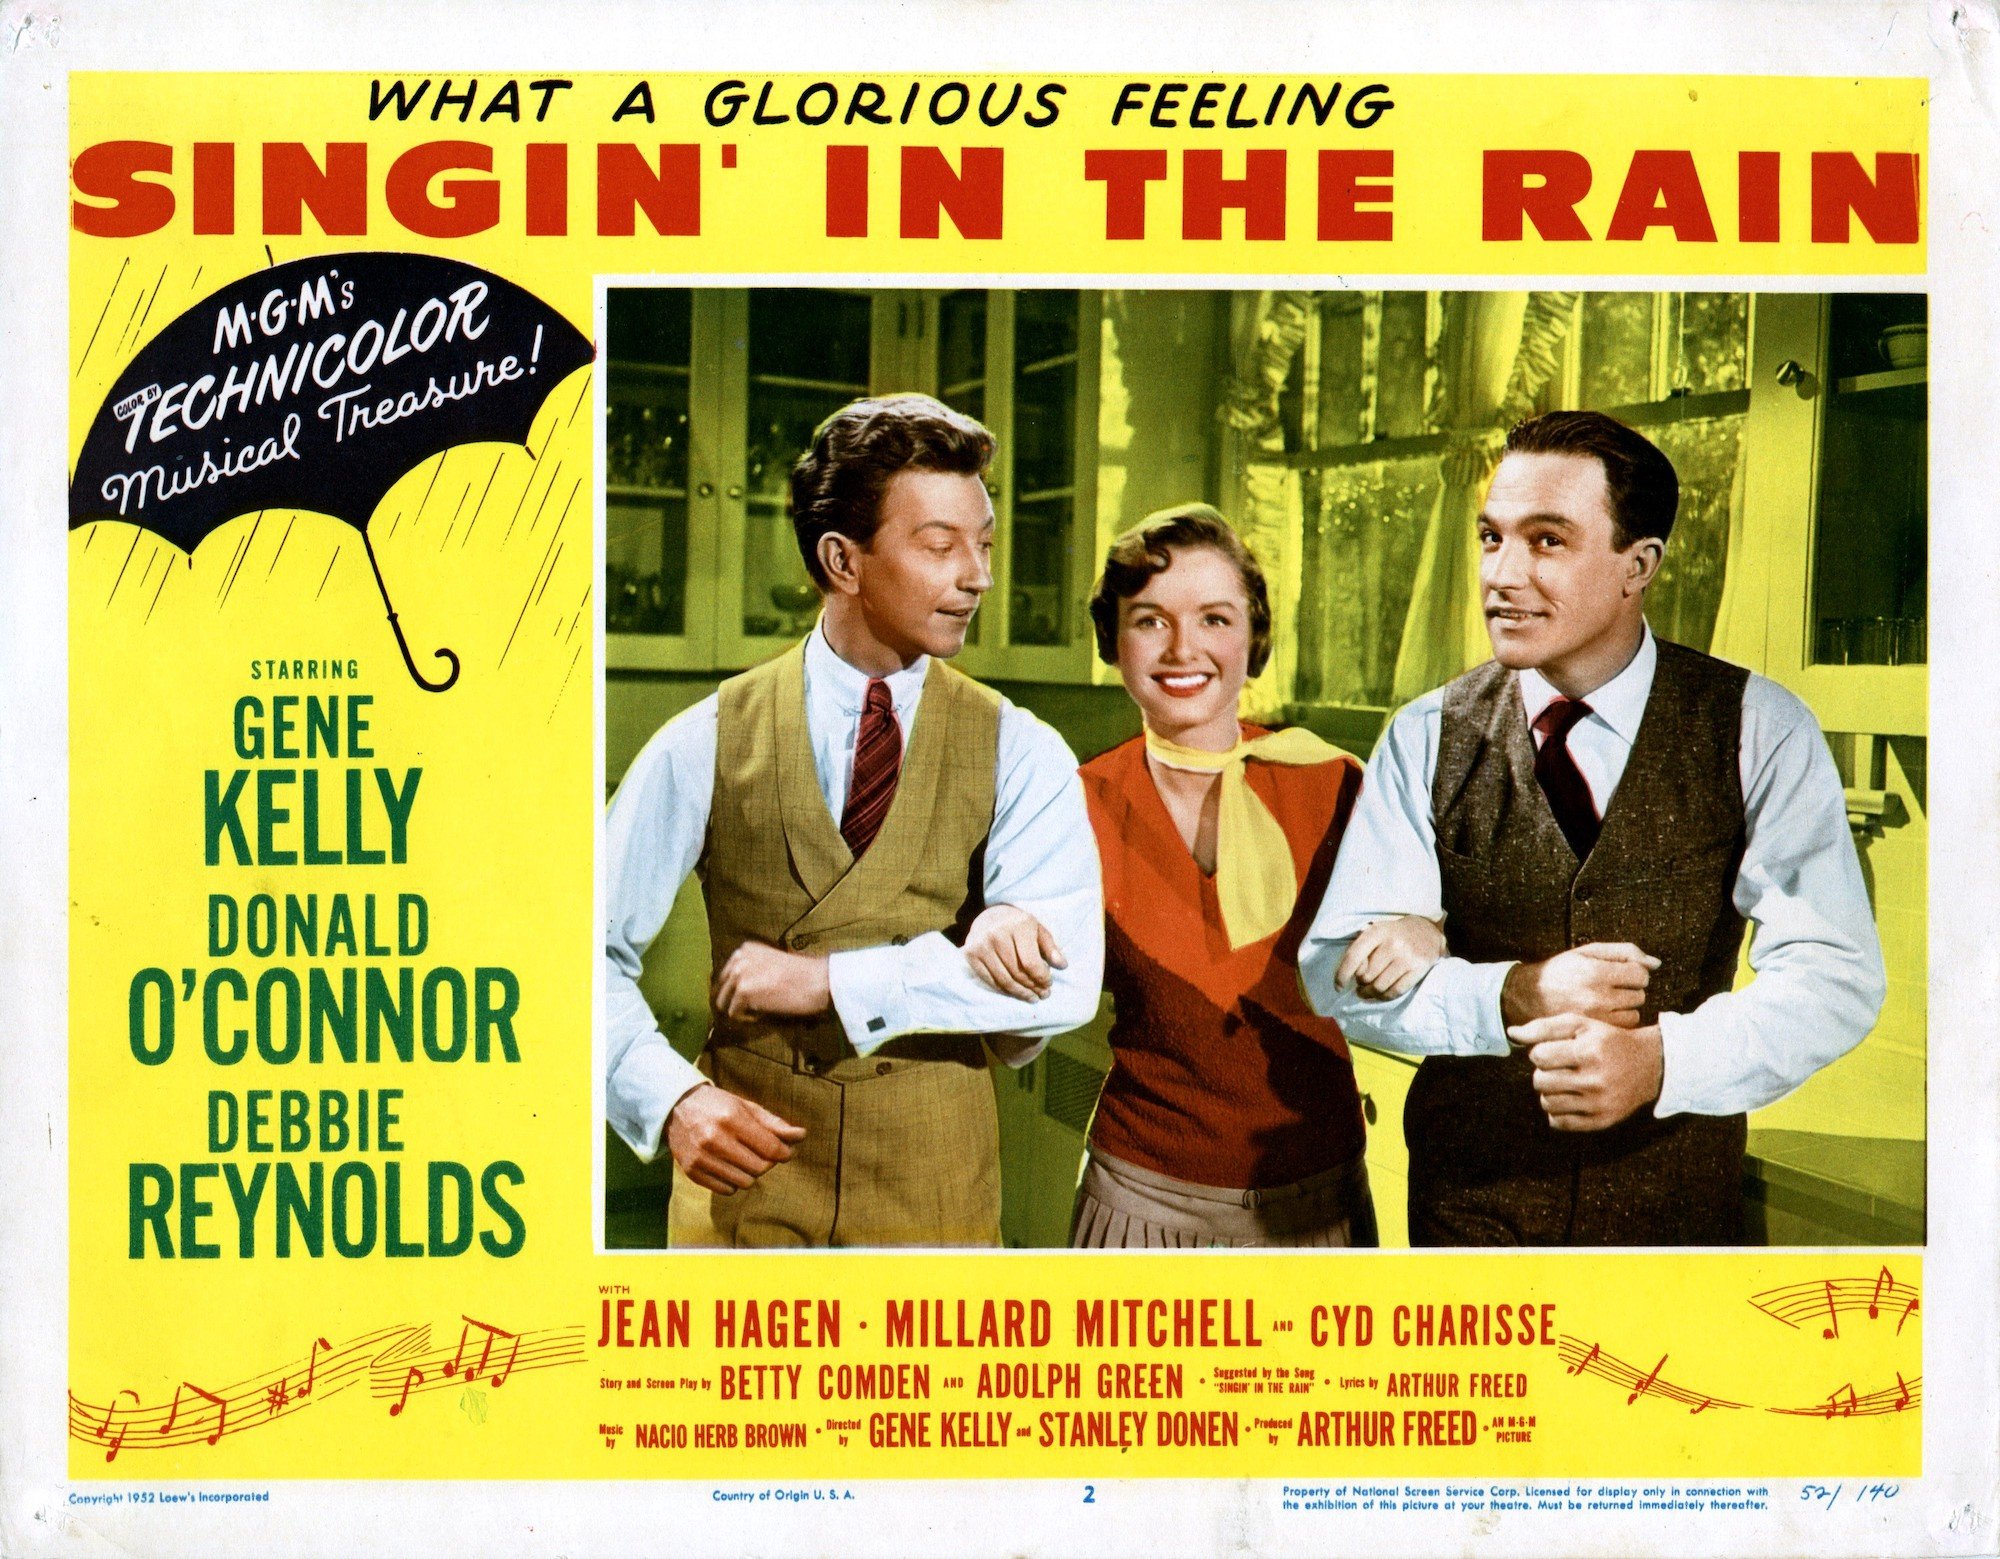 'Singin' in the Rain': Donald O'Connor, Debbie Reynolds, and Gene Kelly link arms